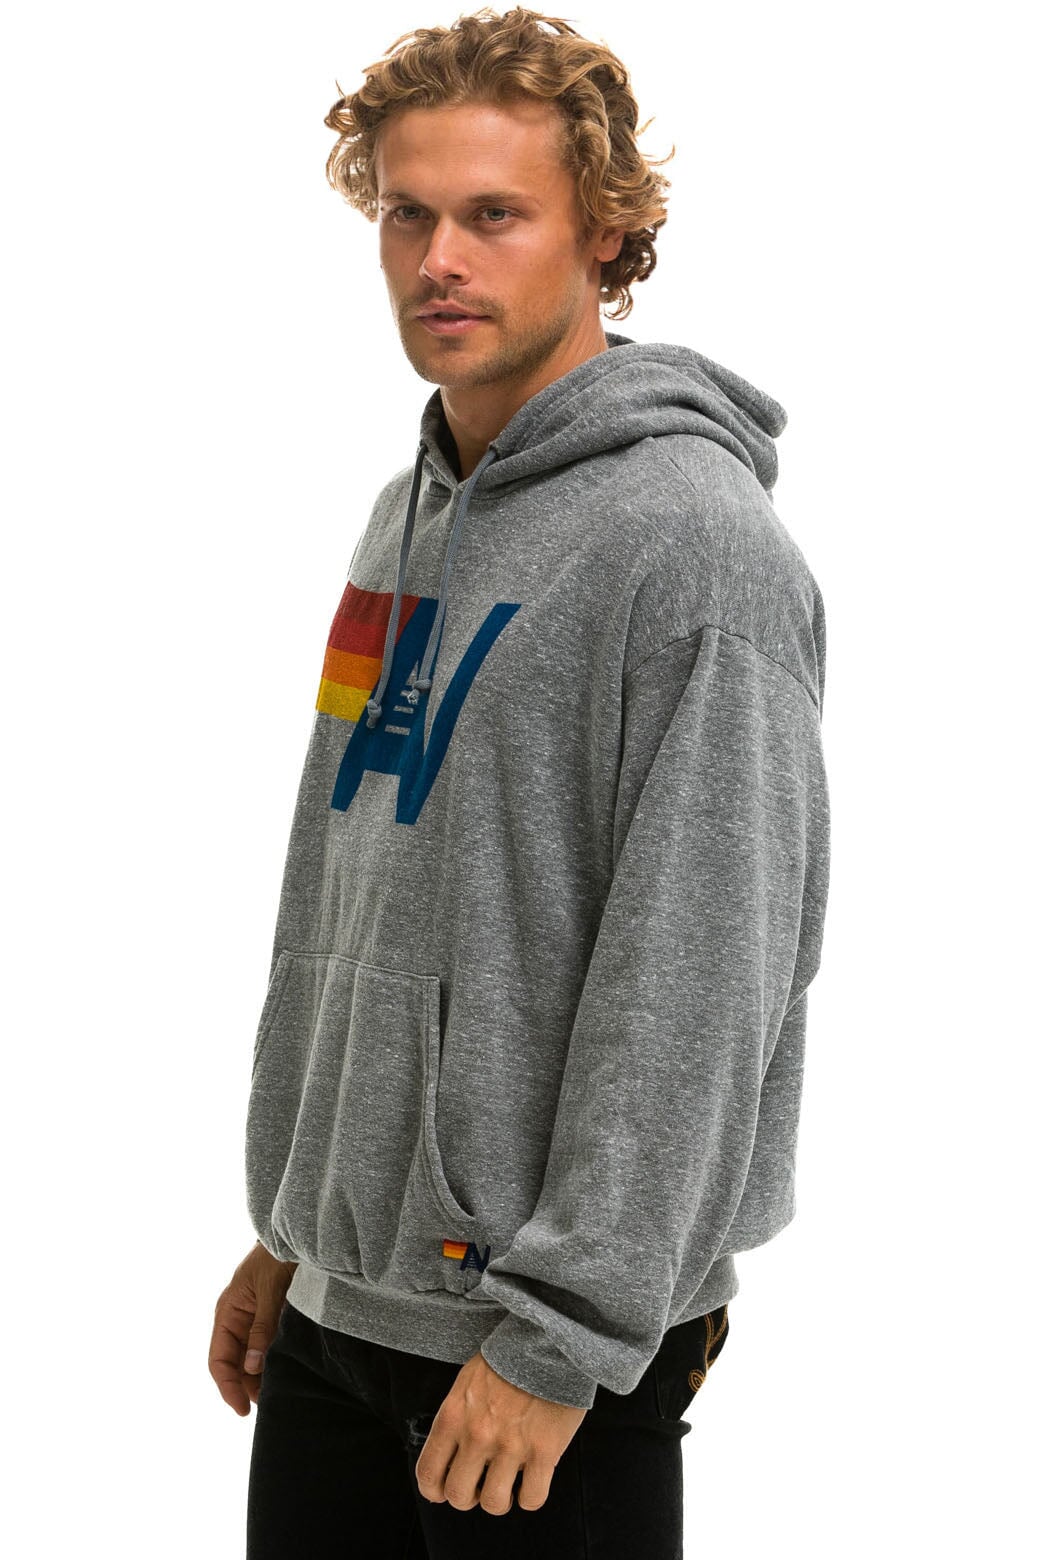 - HOODIE HEATHER - Aviator PULLOVER GREY Nation RELAXED LOGO